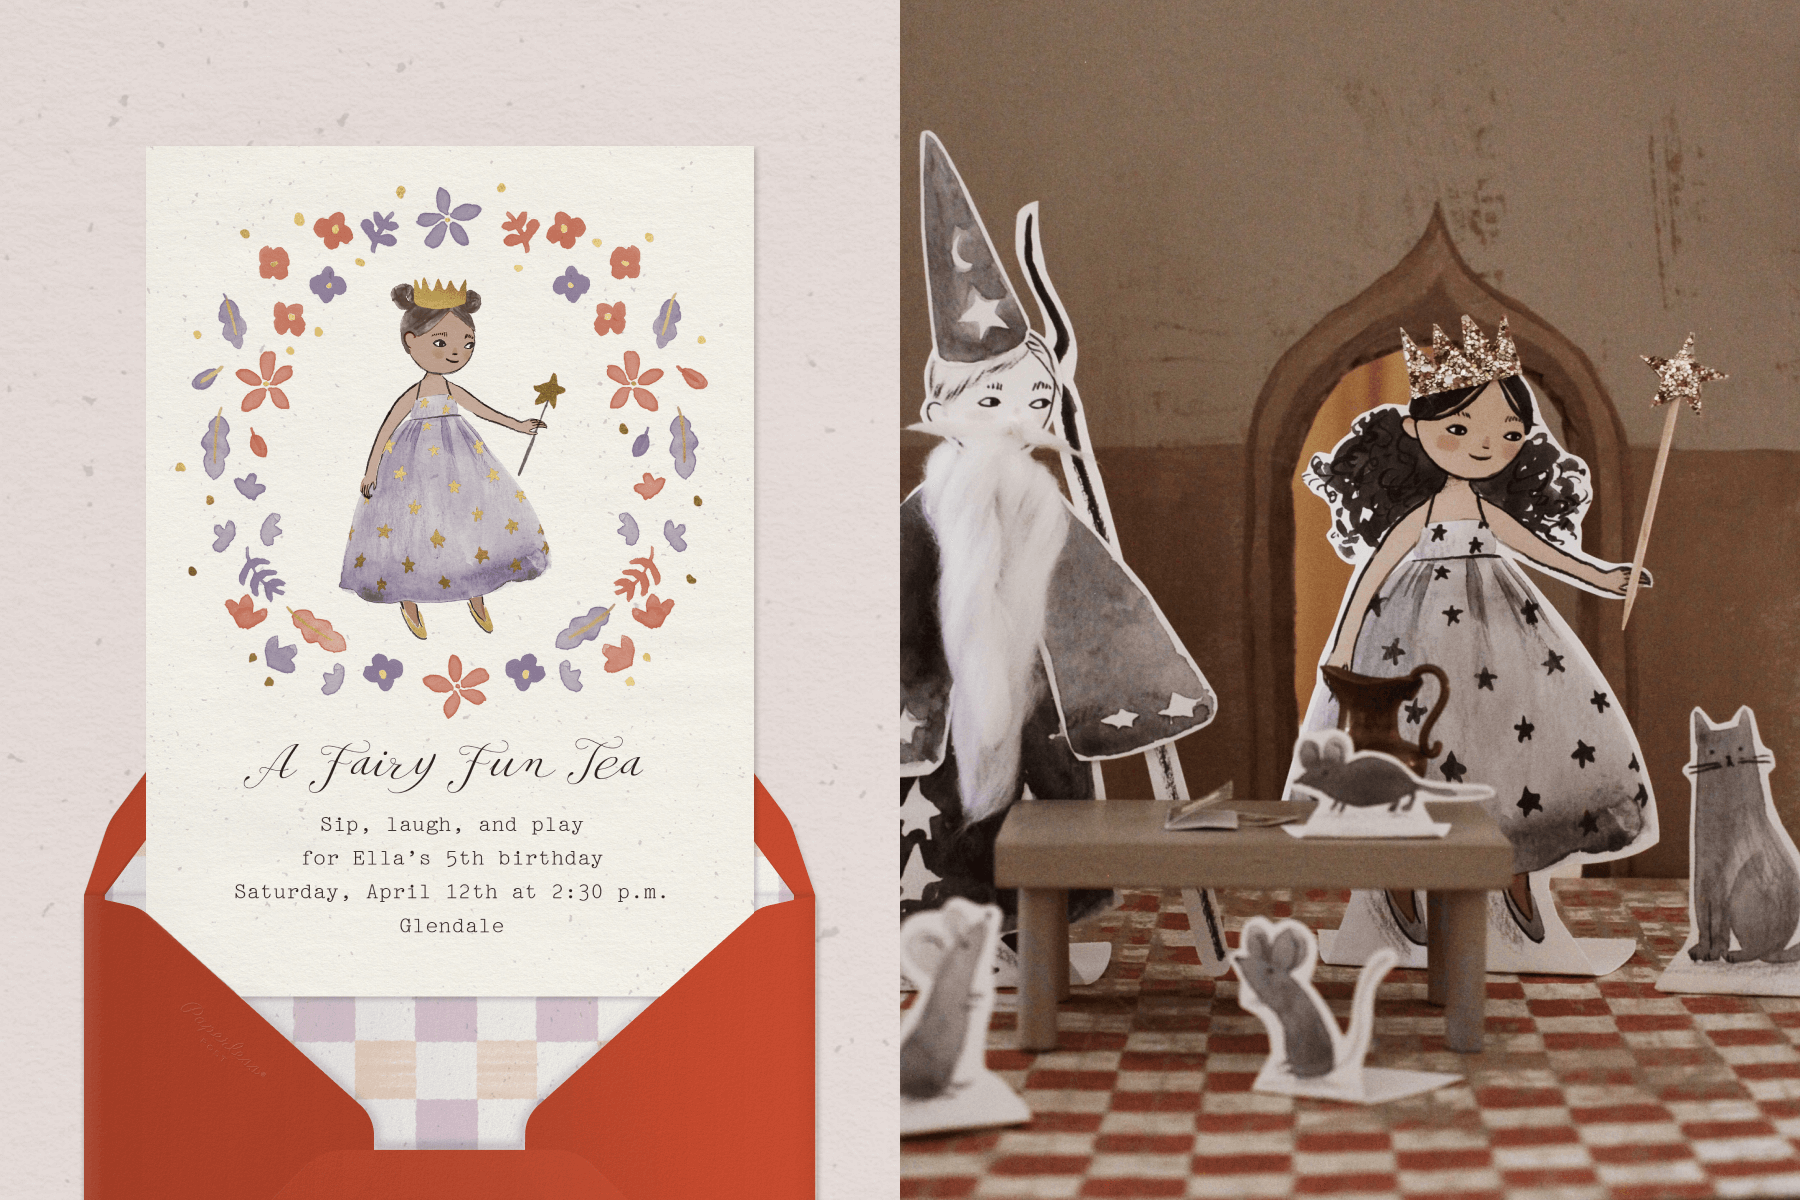 Left: Children's birthday invitation featuring an illustrated fairy princess in a purple dress surrounded by a circle of flowers on an off-white background with a red envelope. Right: Children's paper cutout scene of a wizard and princess. 